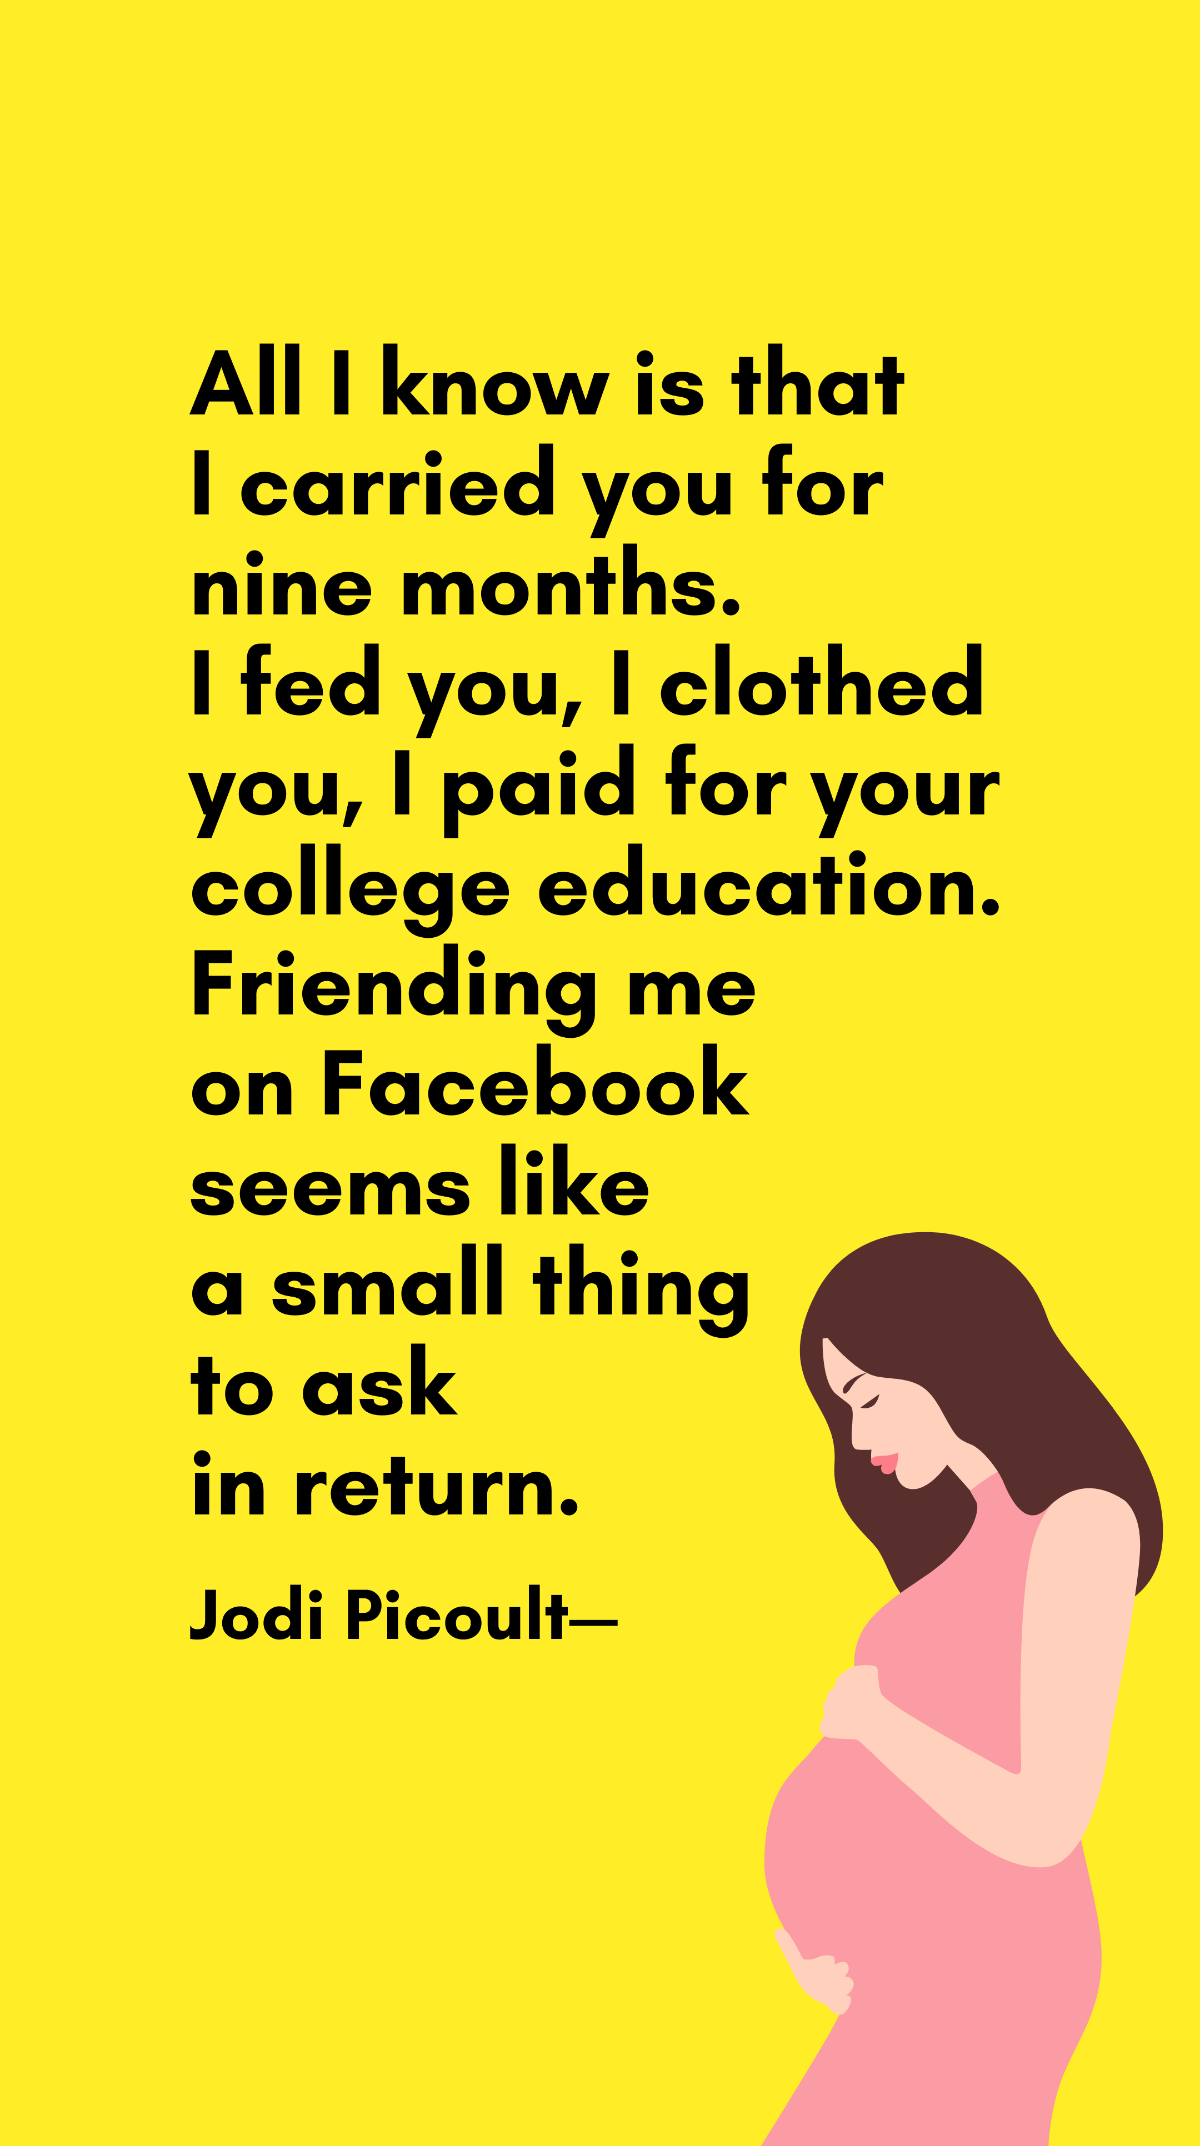 Free Jodi Picoult - All I know is that I carried you for nine months. I fed you, I clothed you, I paid for your college education. Friending me on Facebook seems like a small thing to ask in return. Templa